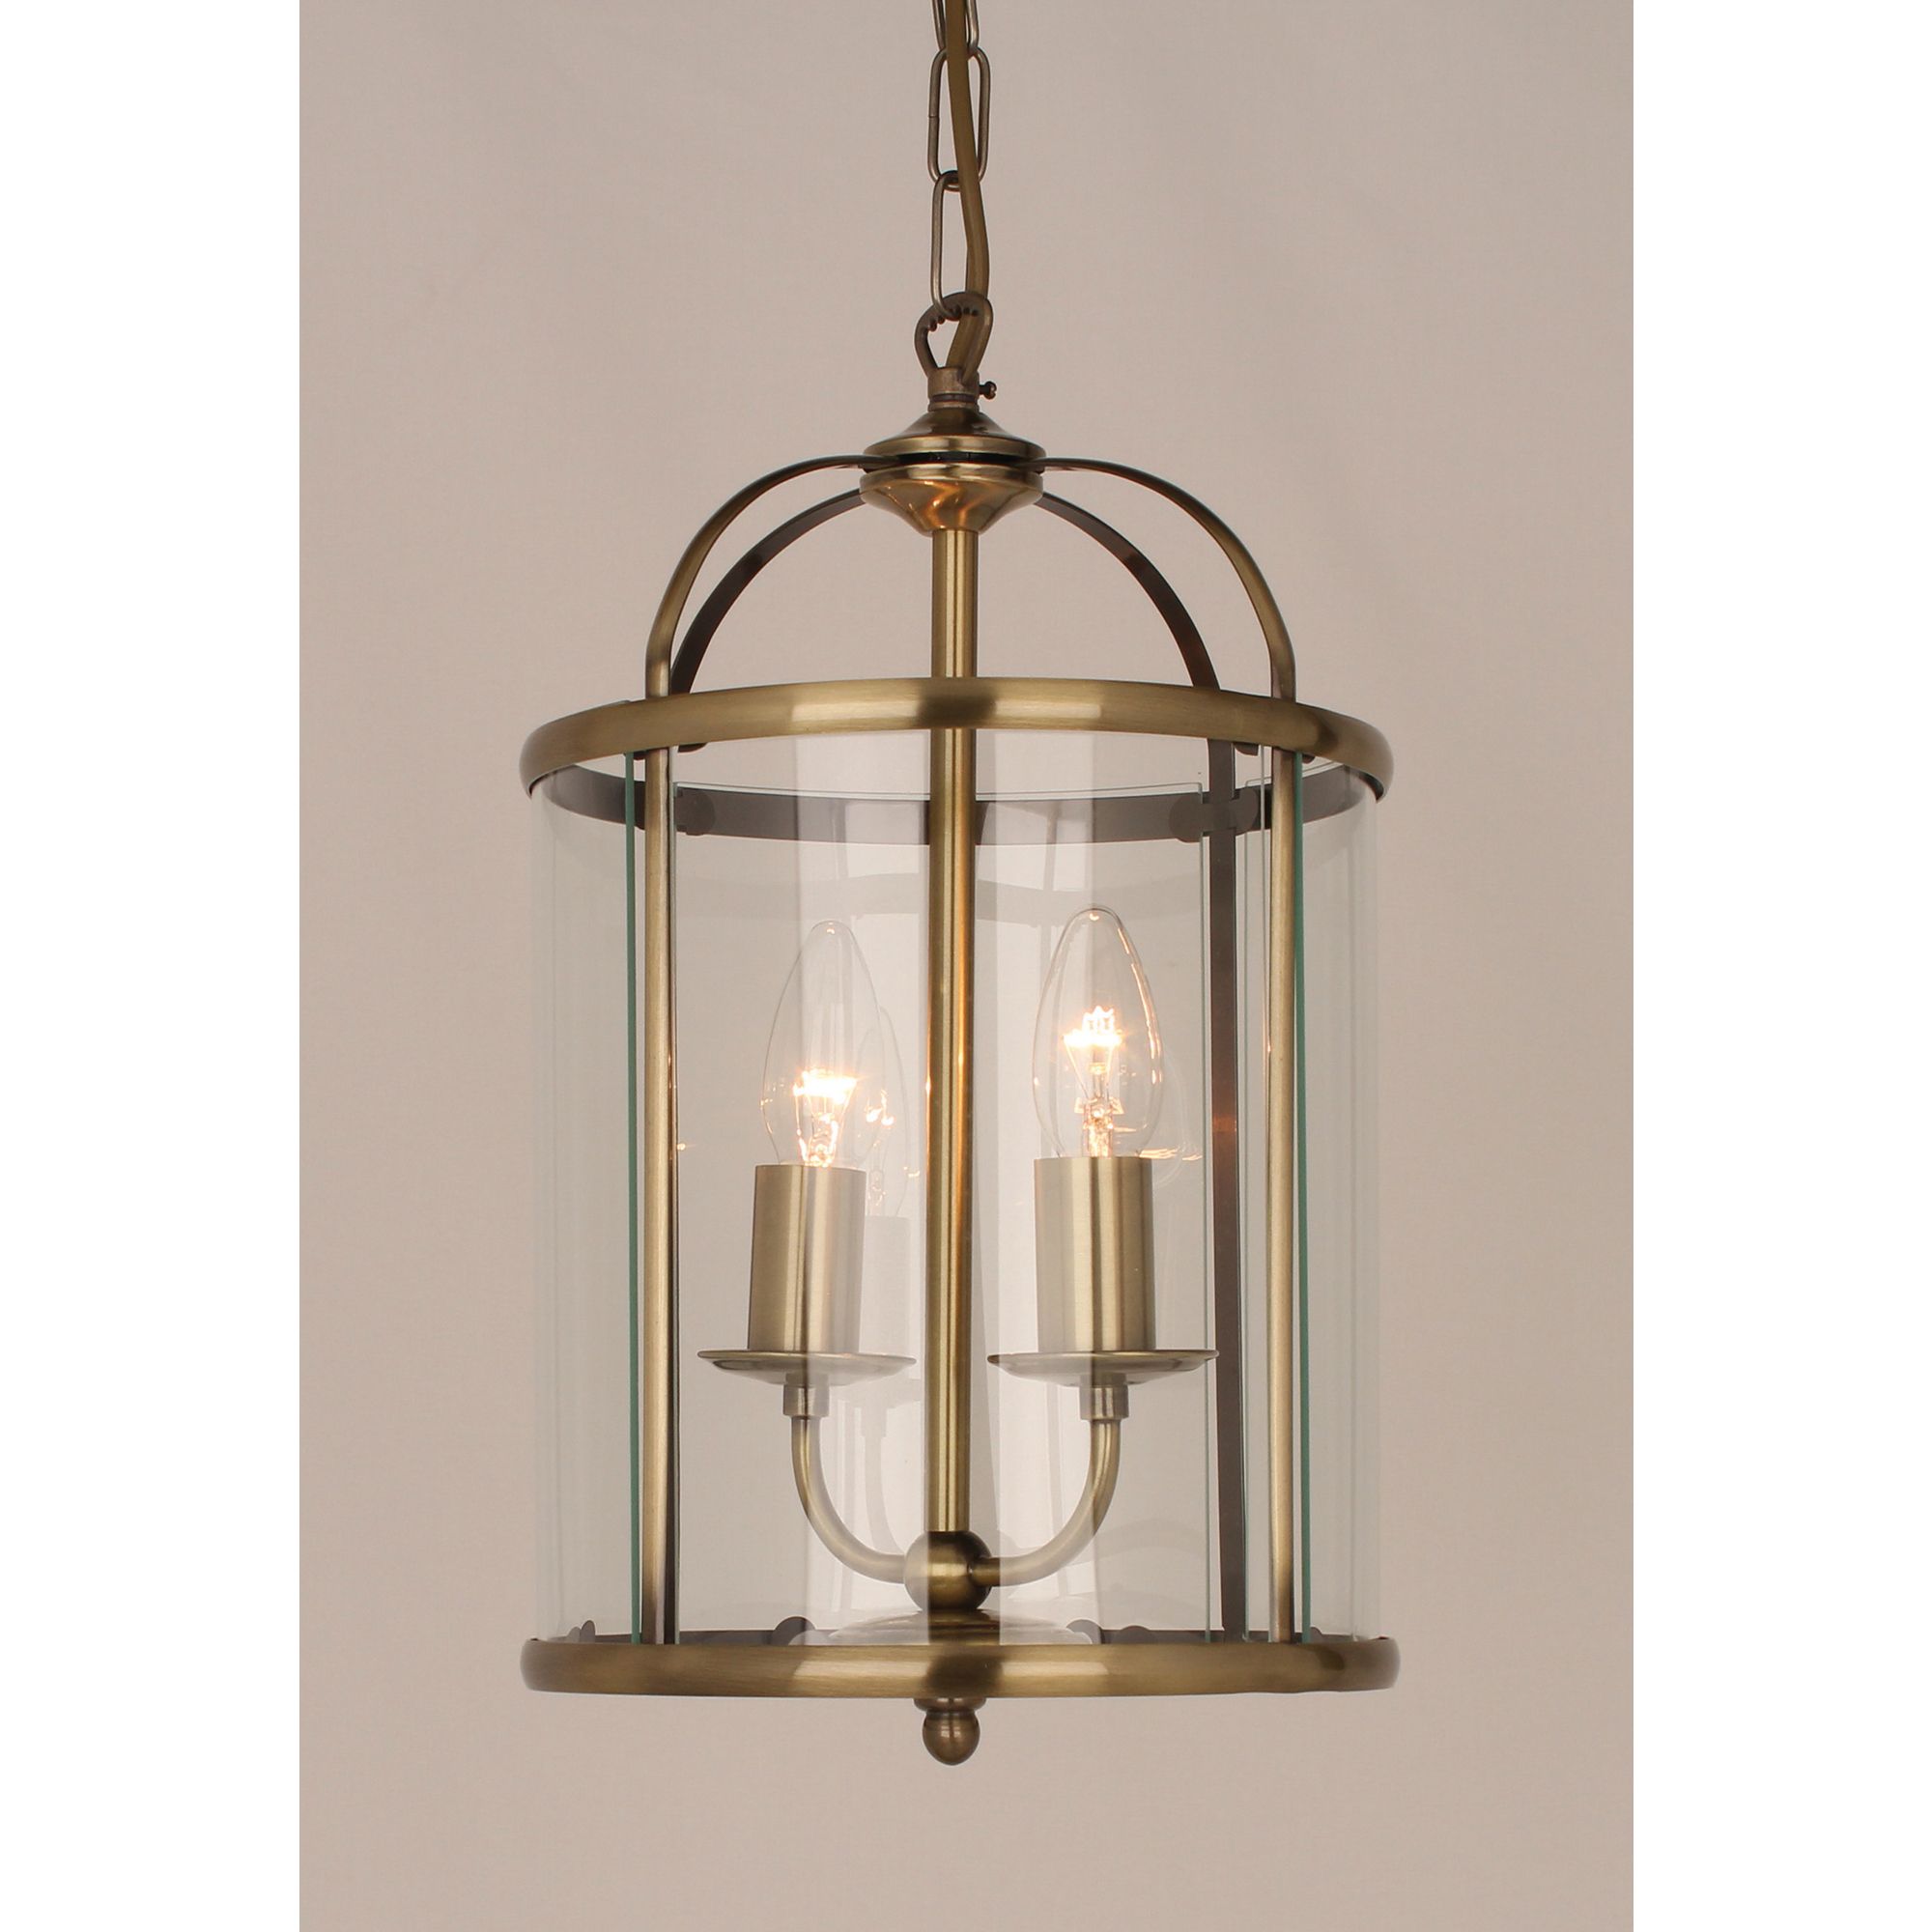 Most Recently Released Brass Wrapped Lantern Chandeliers Regarding Impex Lighting Lg77132/ab Orly 2 Light Ceiling Lantern In Antique Brass  Finish 48986 – Indoor Lighting From Castlegate Lights Uk (View 10 of 10)